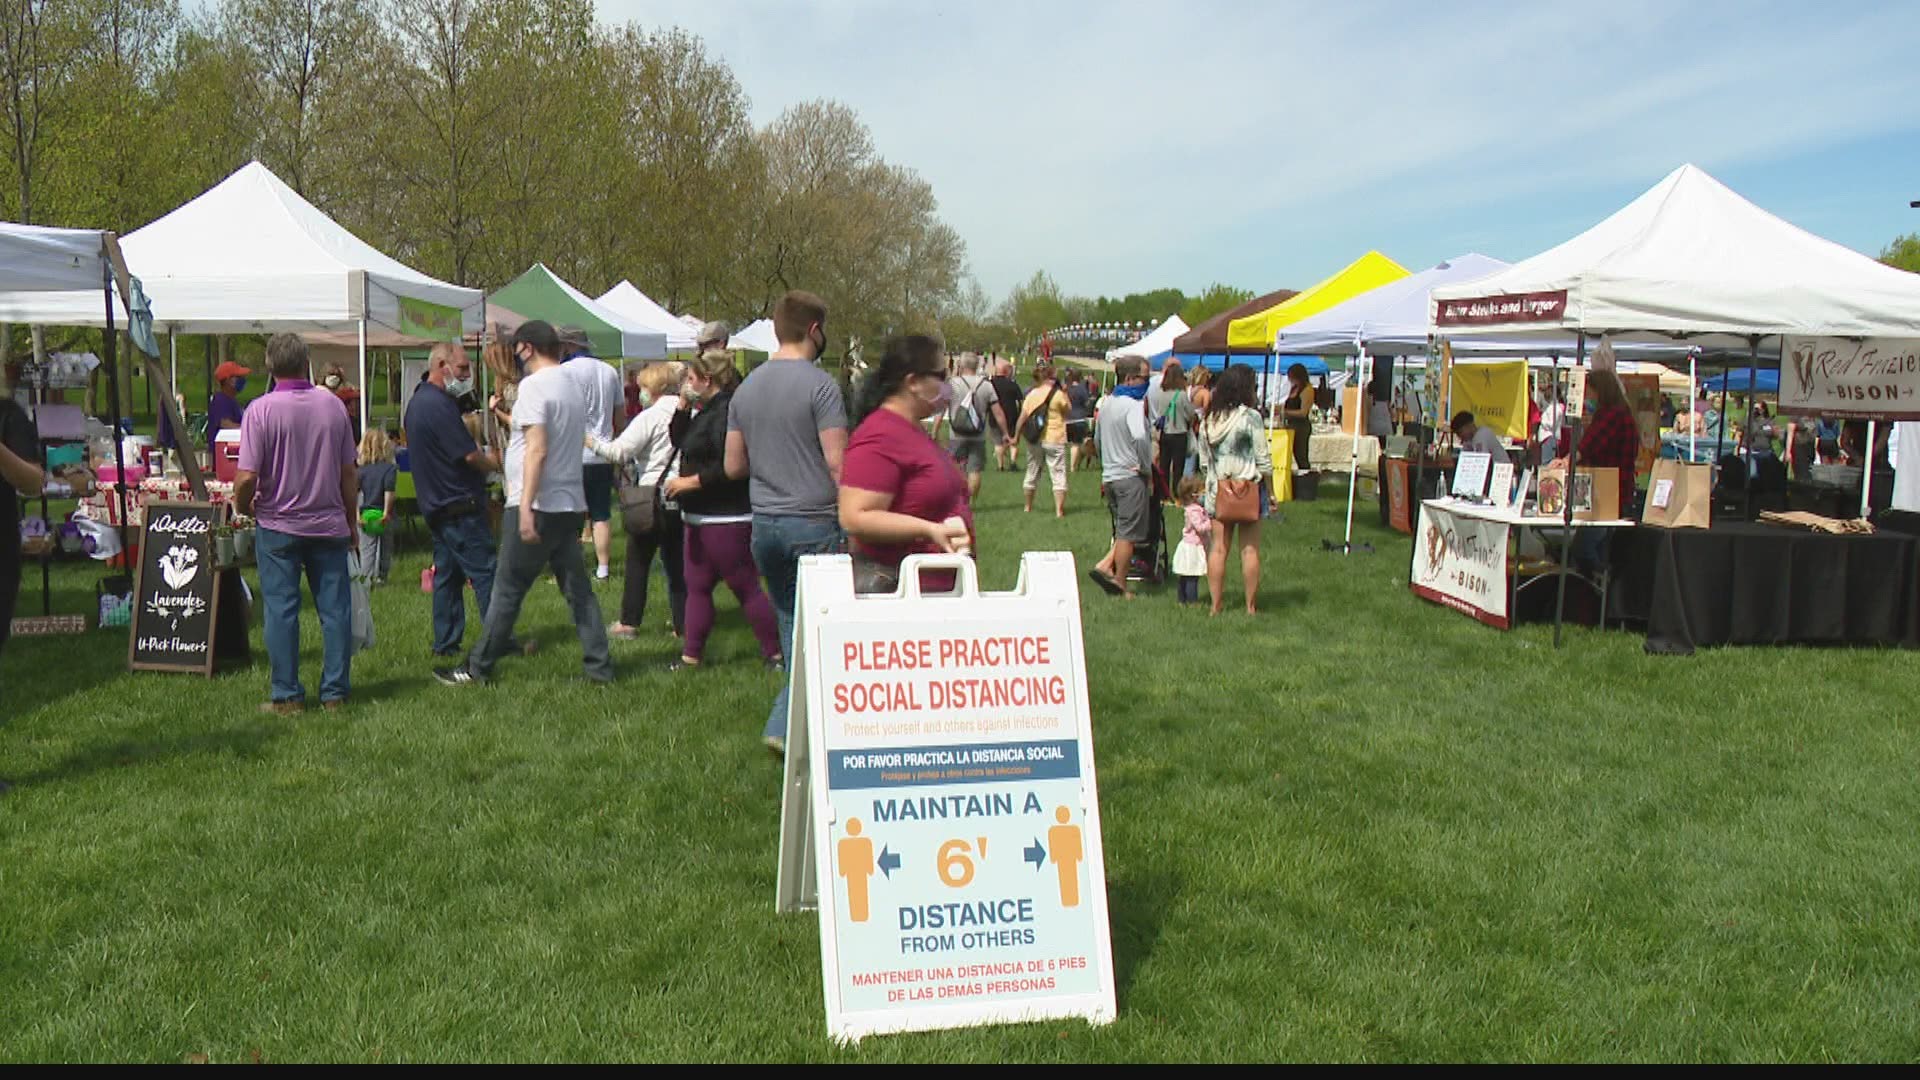 White River State Park hosted its first market of the season. The market gives people the chance to support local farms and other Central Indiana businesses.